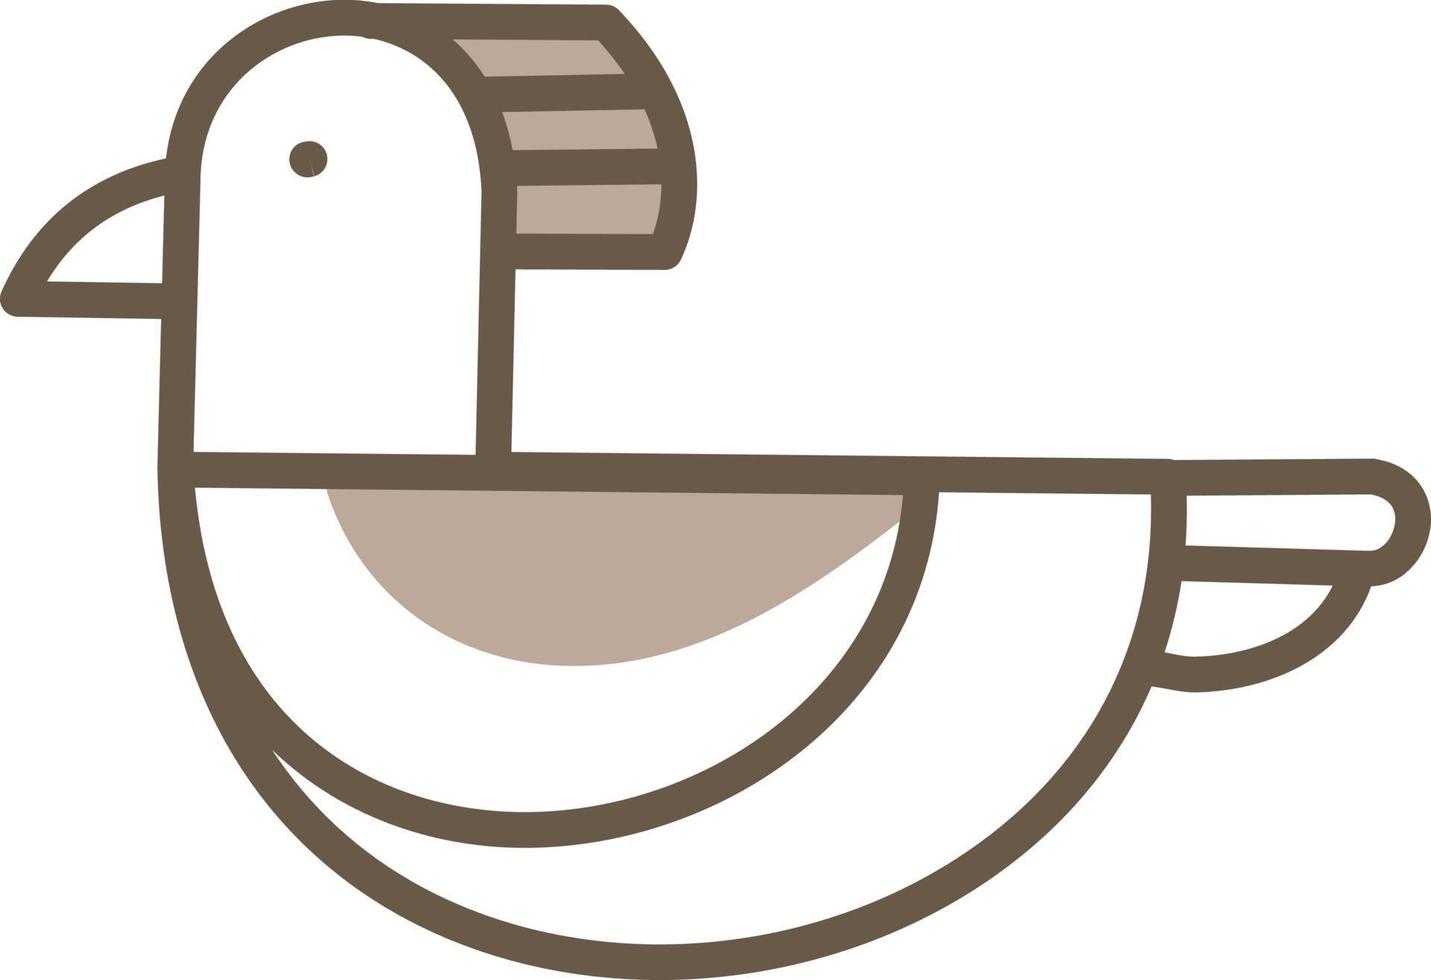 Brown bird, illustration, vector on a white background.